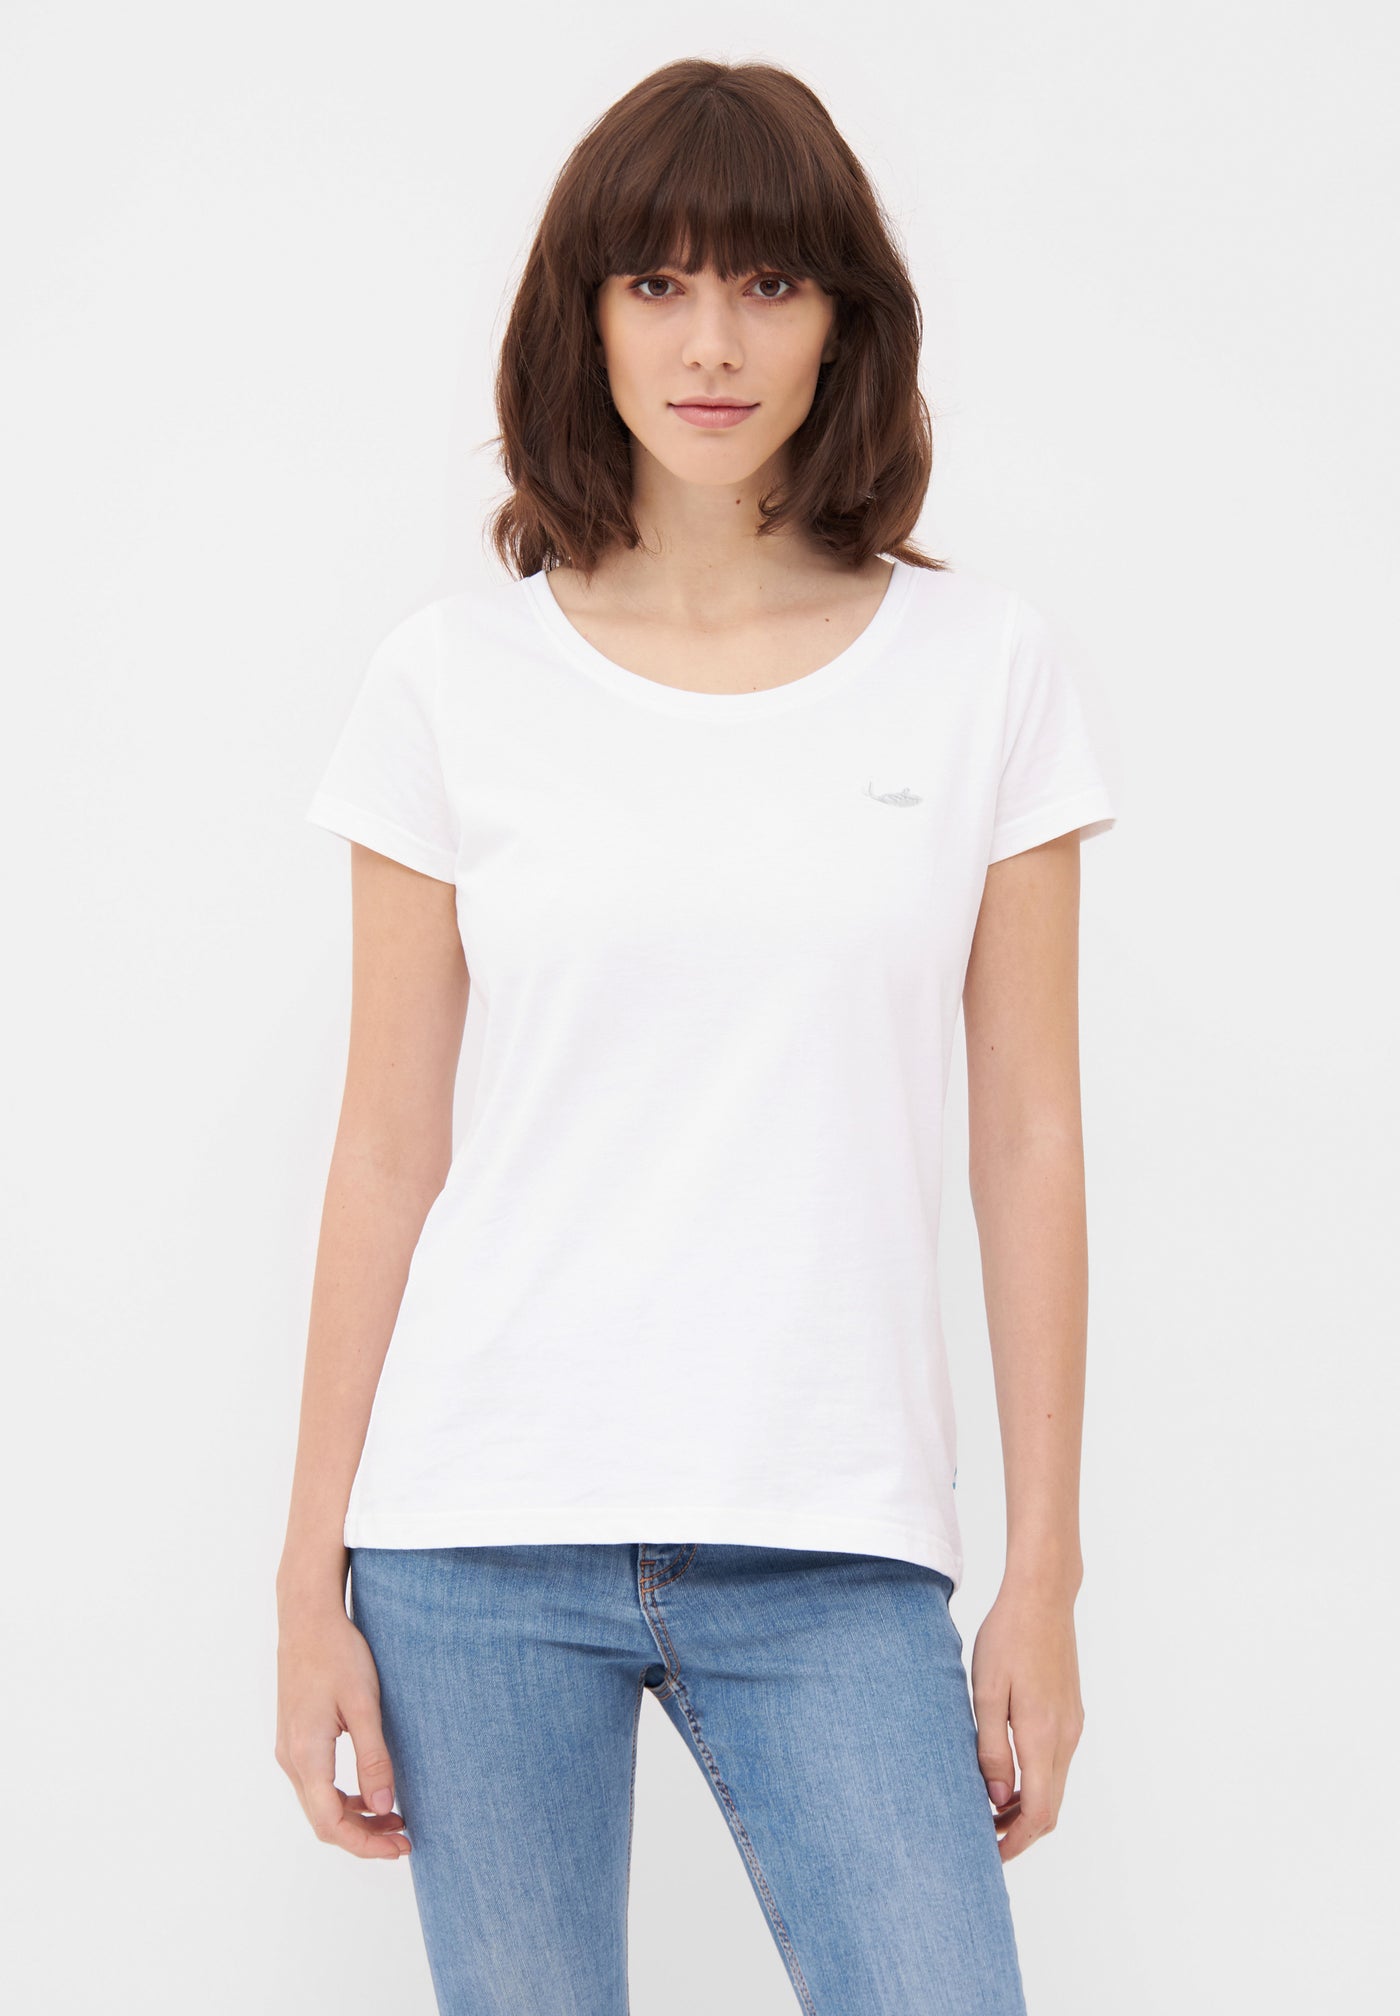 MBRC WOMEN SUSTAINABLE WHITE T-SHIRT "WHITE LOGO" - FRONTAL VIEW